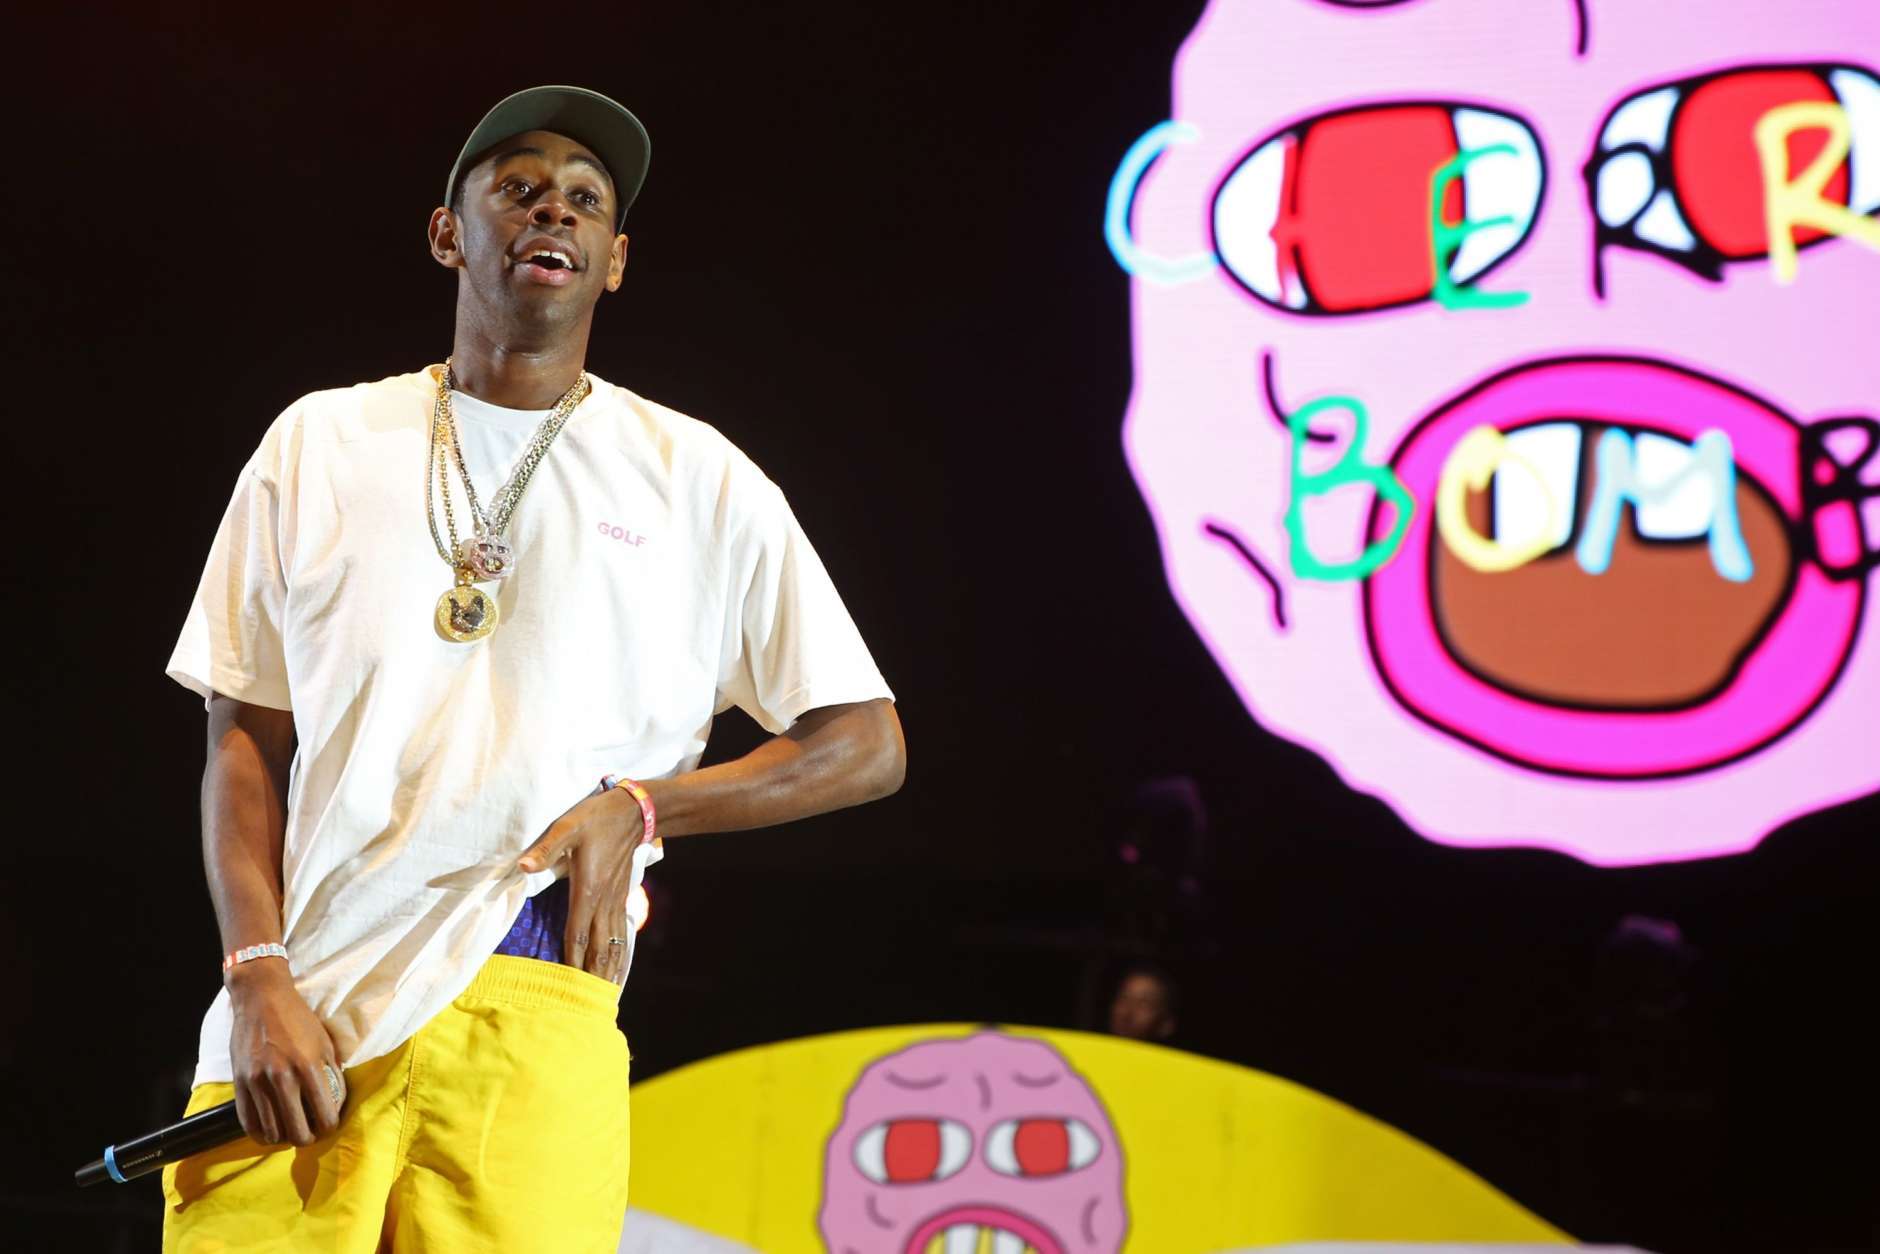 Tyler The Creator performs at the 2015 Coachella Music and Arts Festival on Saturday, April 11, 2015, in Indio, Calif. (Photo by Rich Fury/Invision/AP)